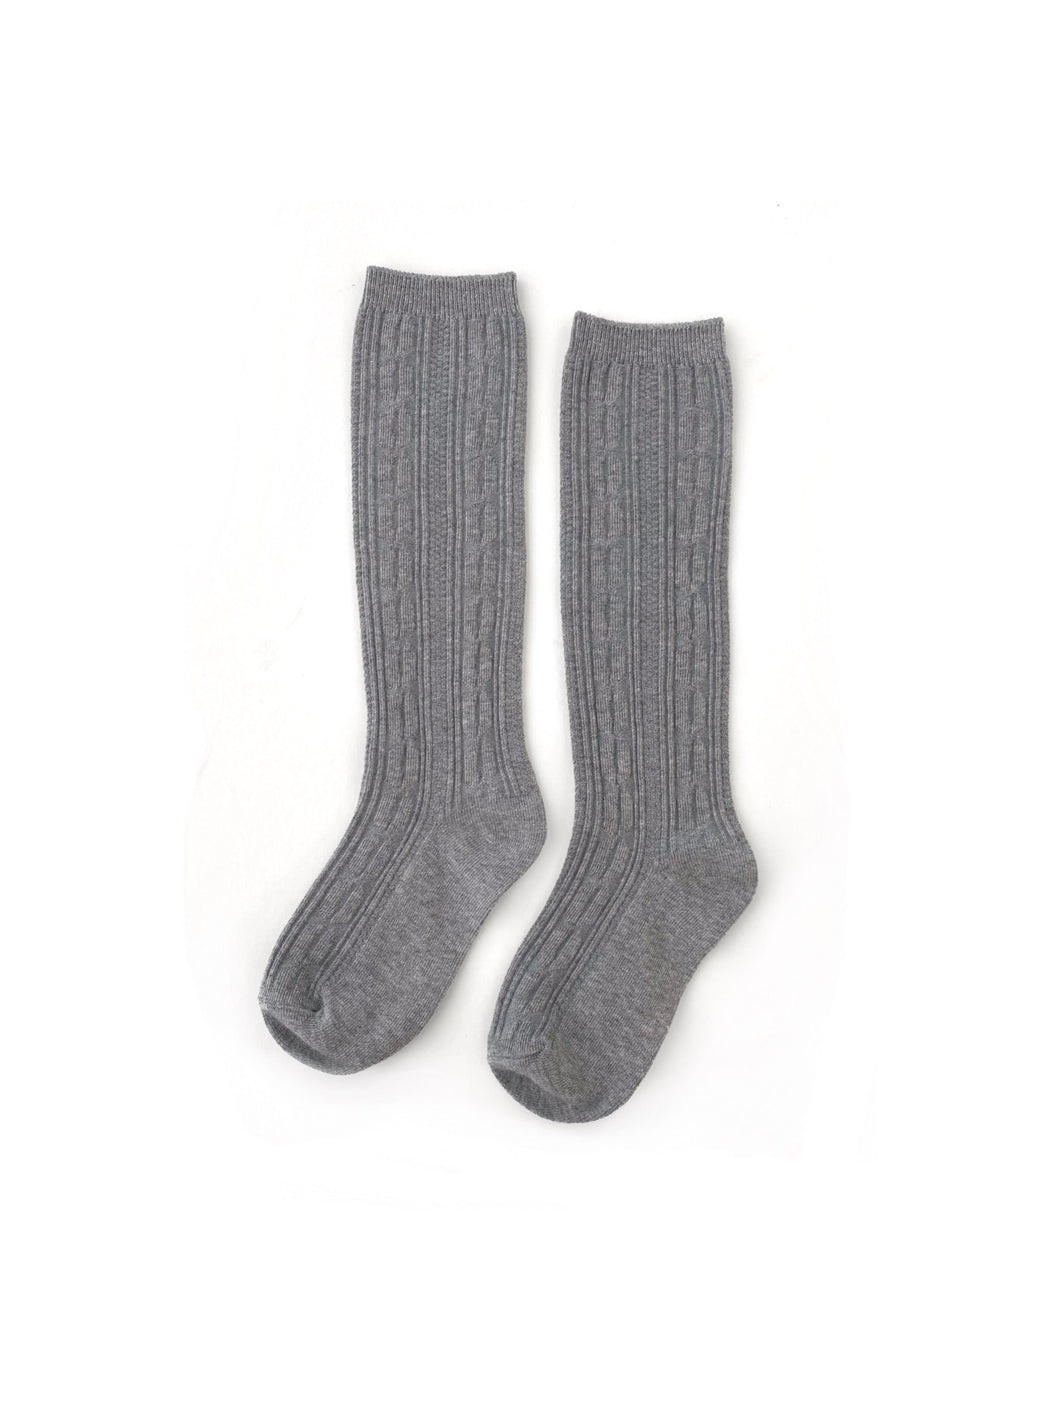 Little Stocking Co. Gray Cable Knit Knee High Socks